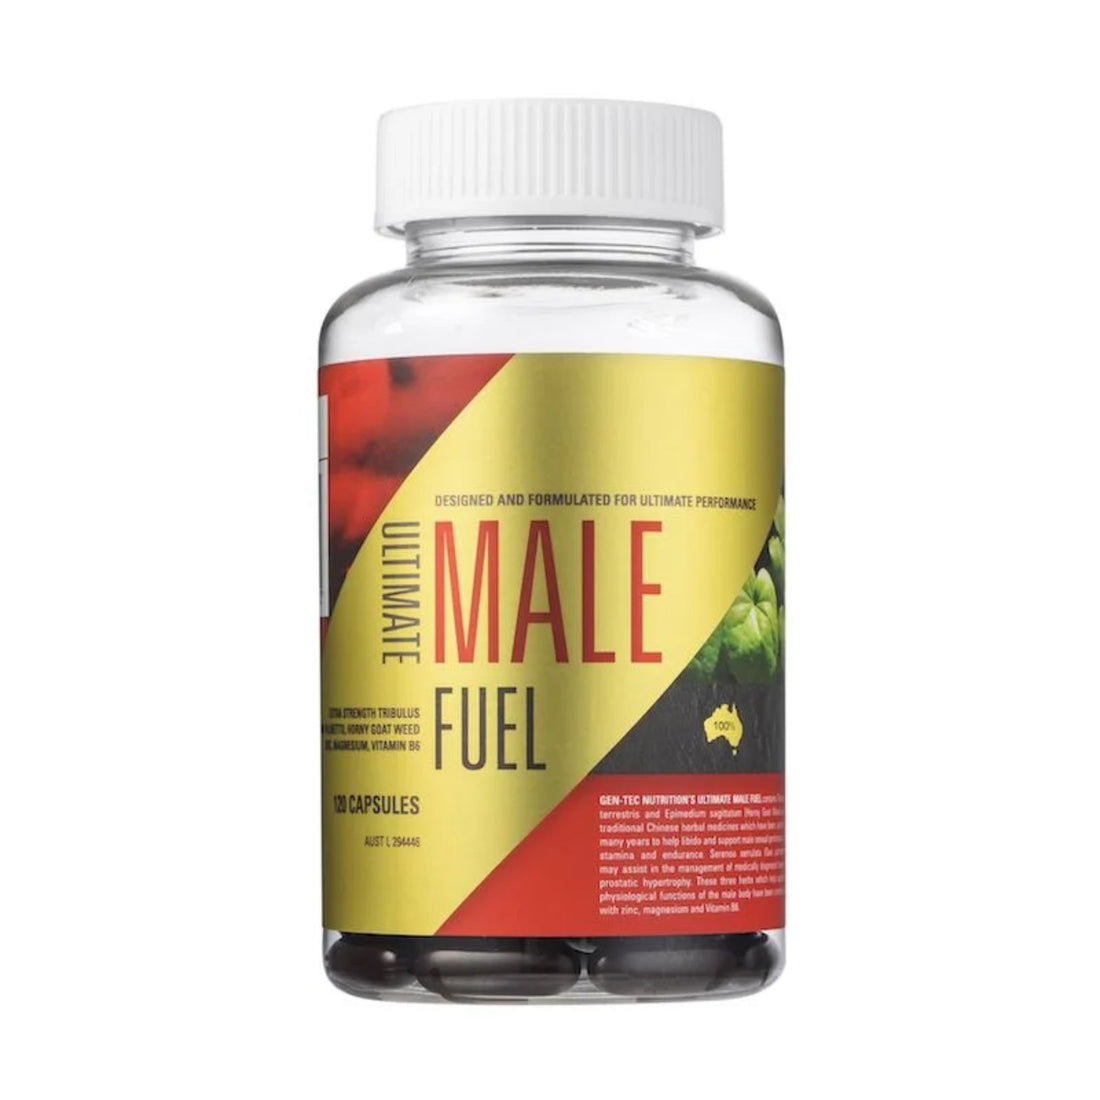 Gentec Ultimate Male Fuel Test Booster